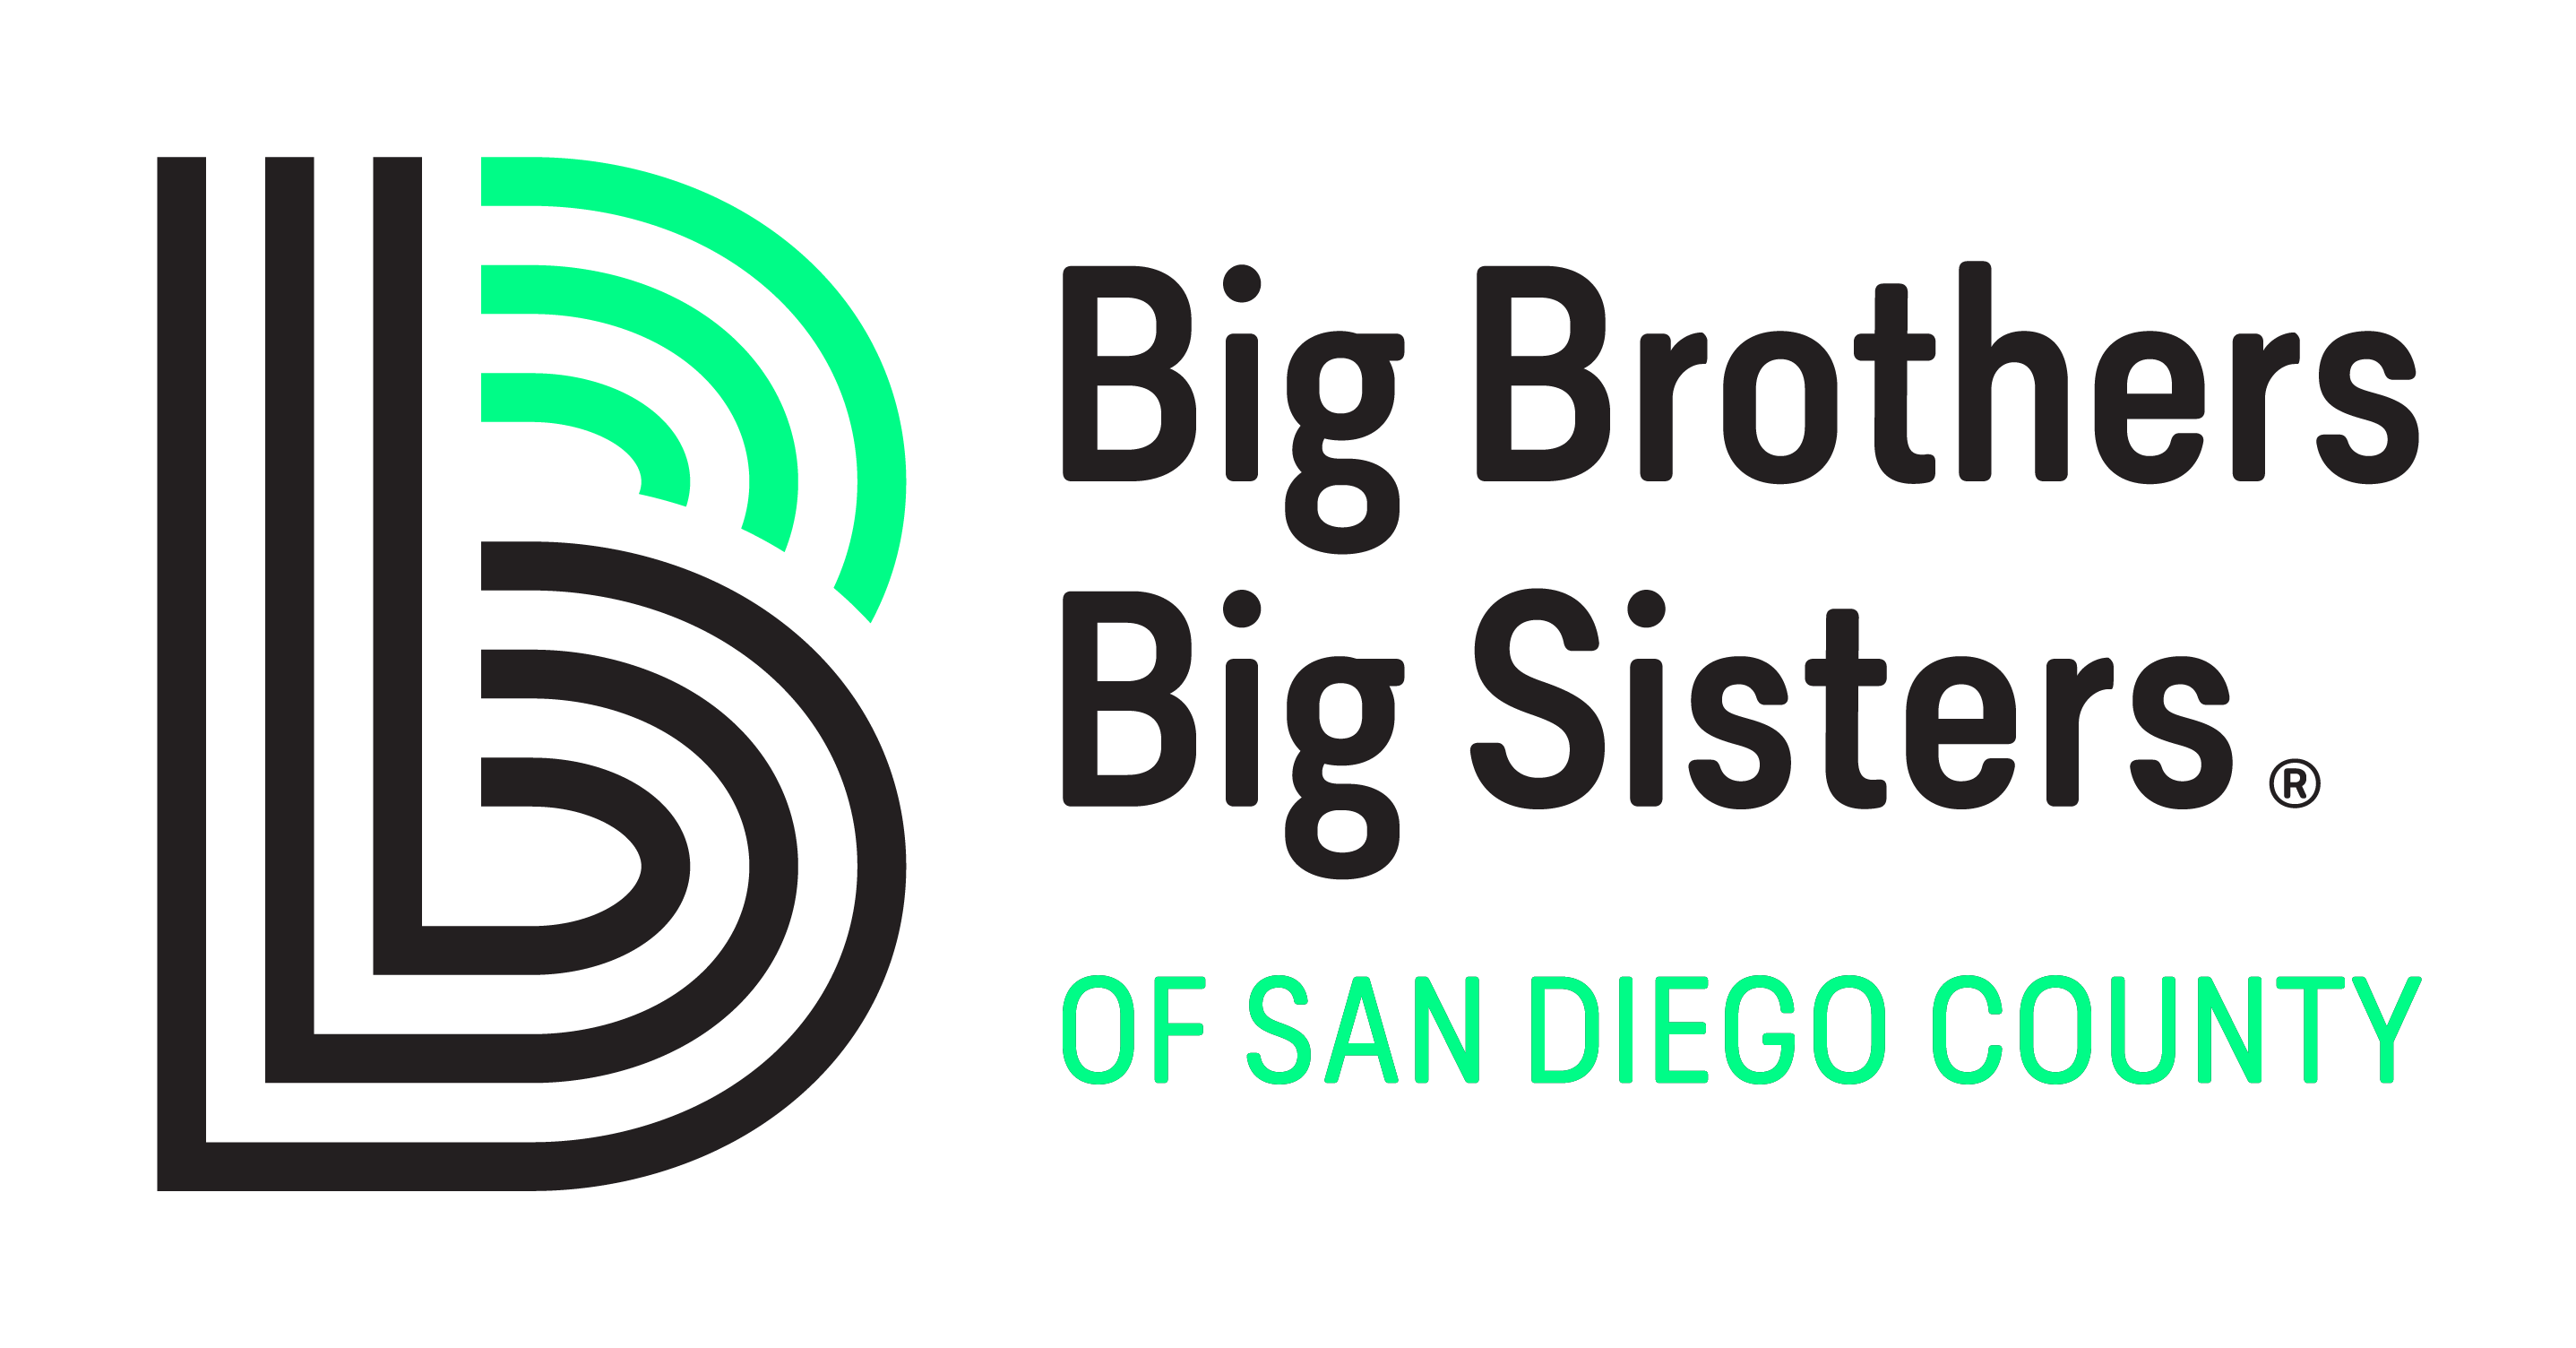 BBBS Sand Diego County